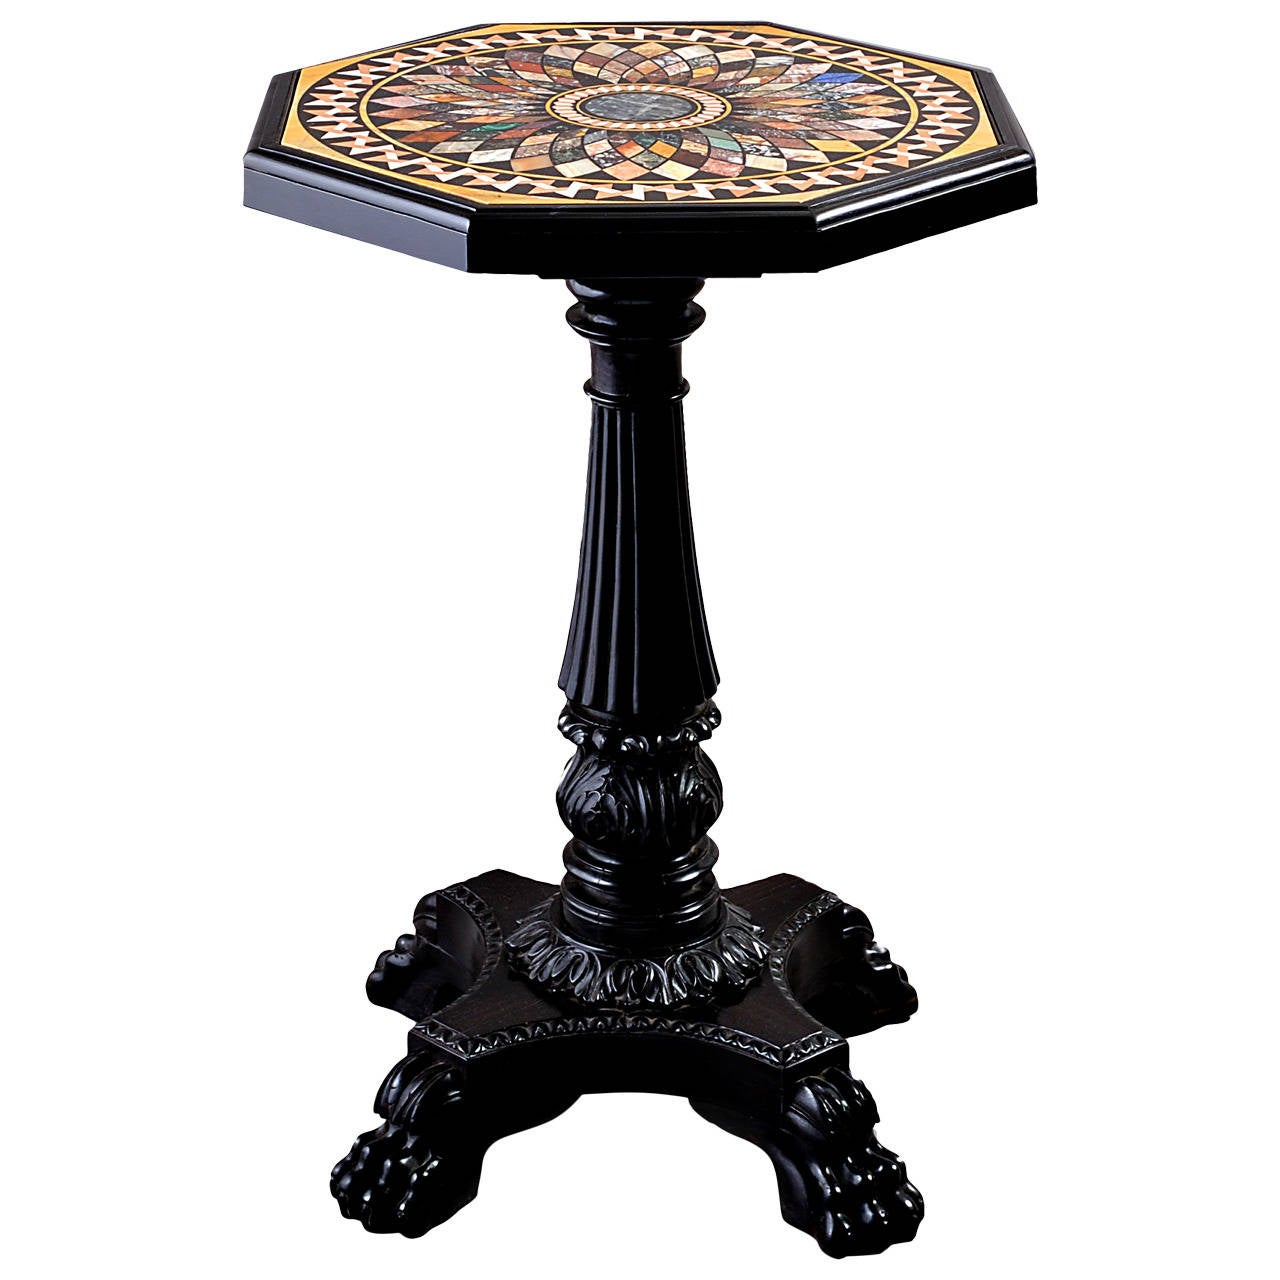 Roman Pietre Dure-Top Attributed to Raffaelli on an Anglo-Indian Ebony Table For Sale